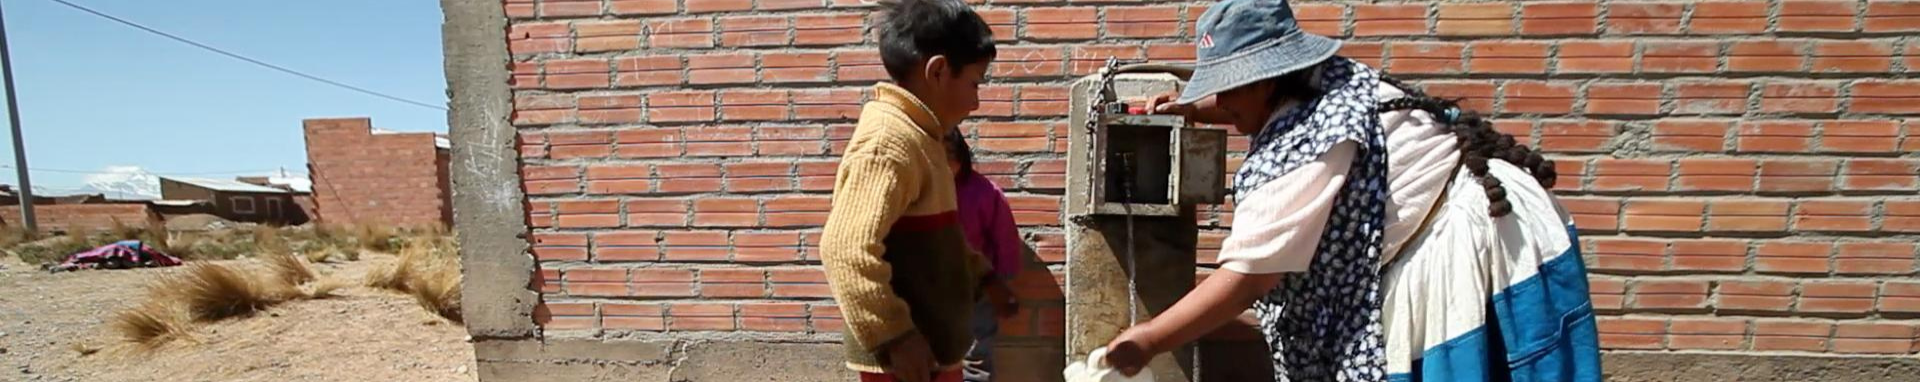 Supporting Just Transitions to a Sustainable Water Sector in Bolivia